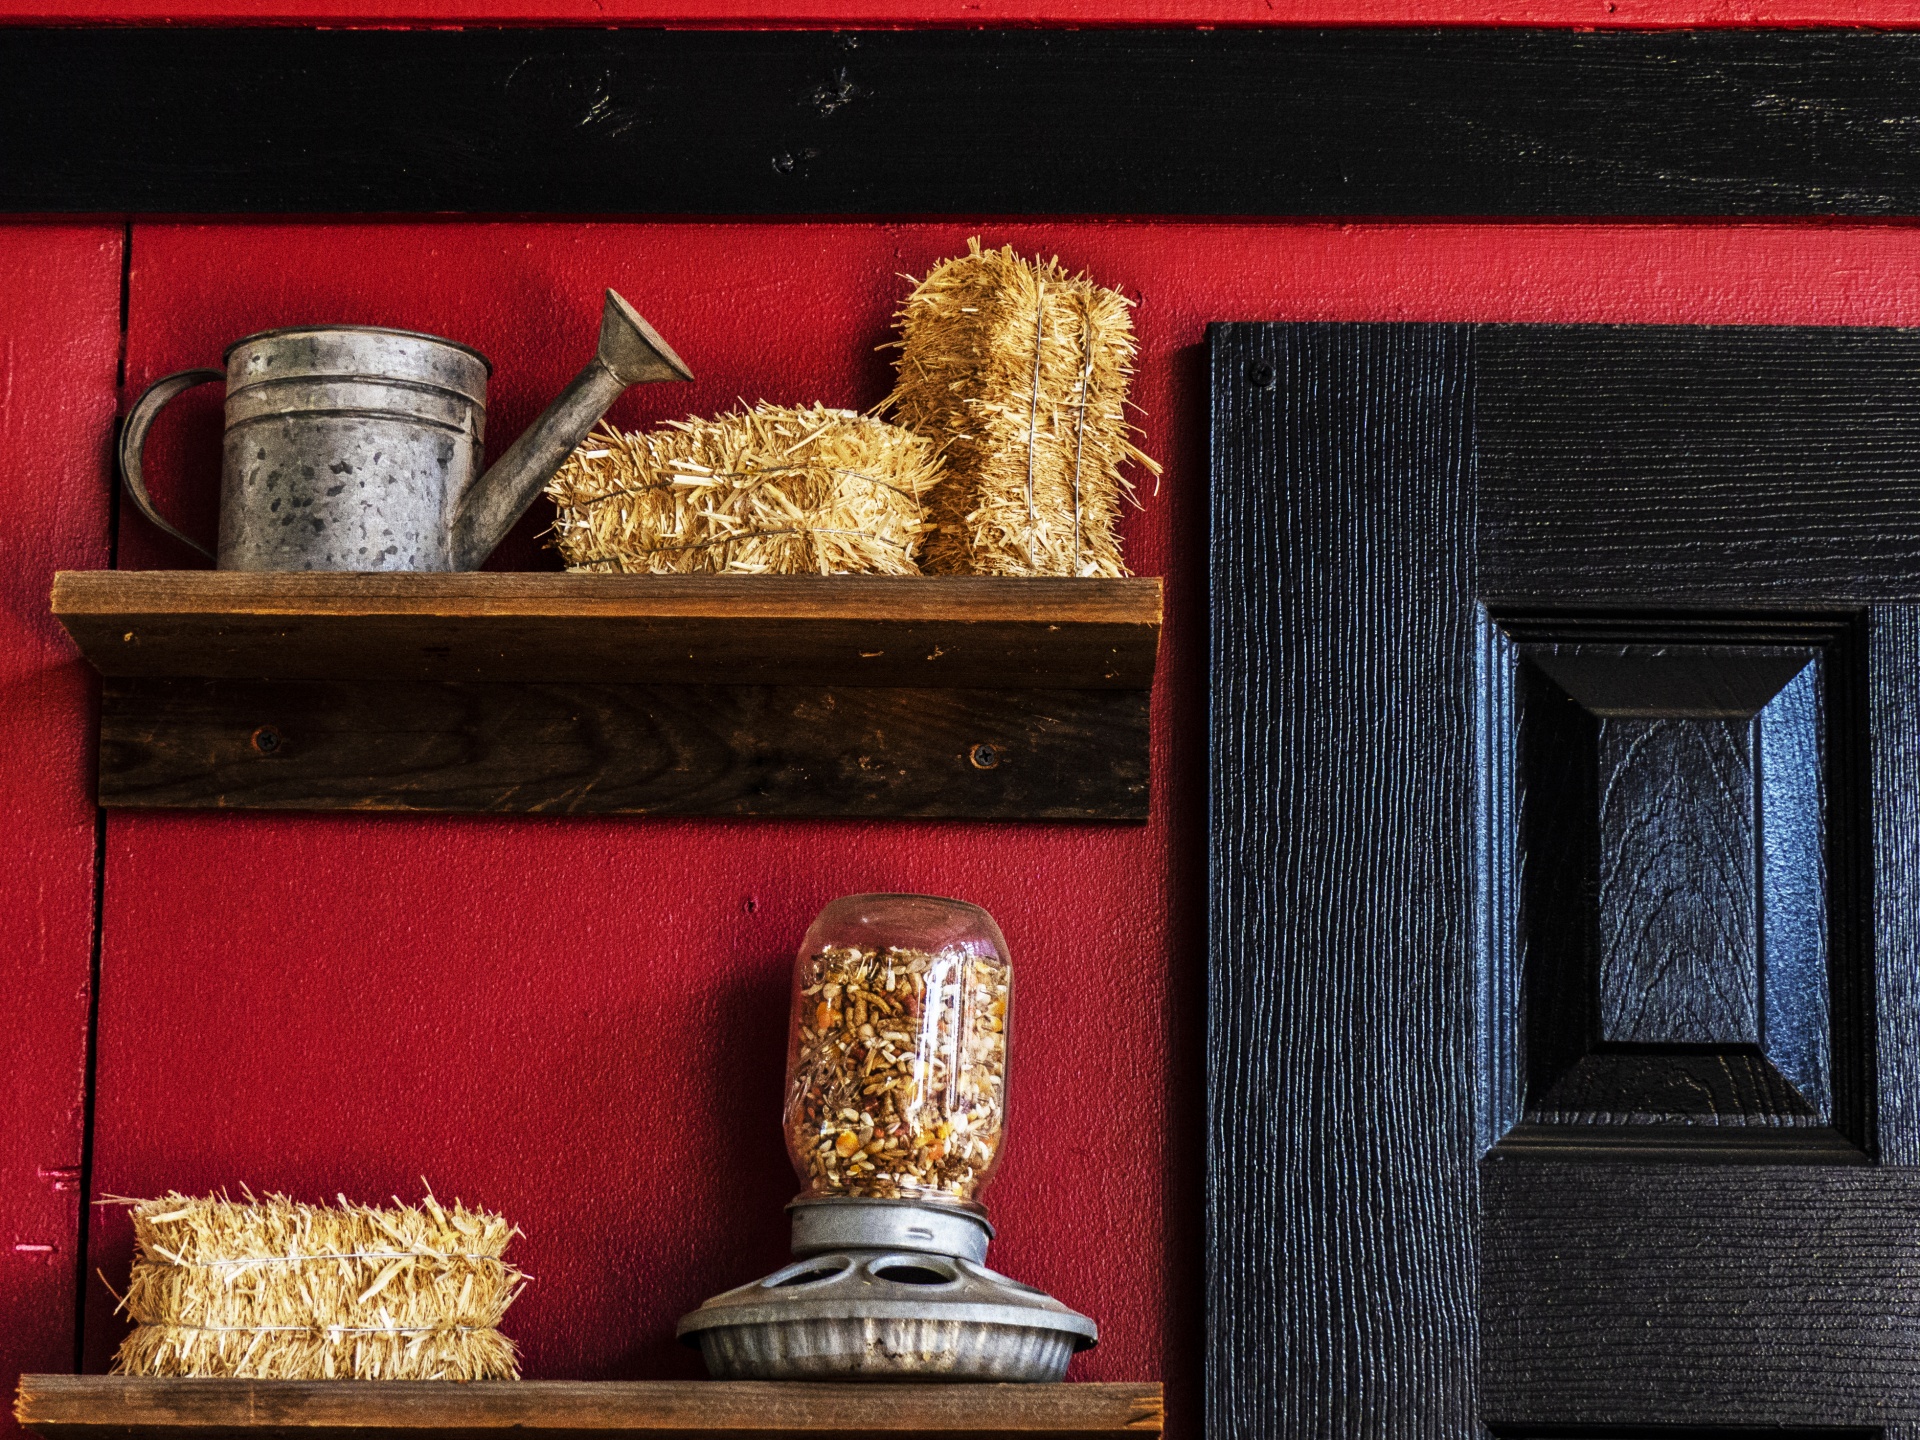 Red wall and a black door with an old jar on a shelf